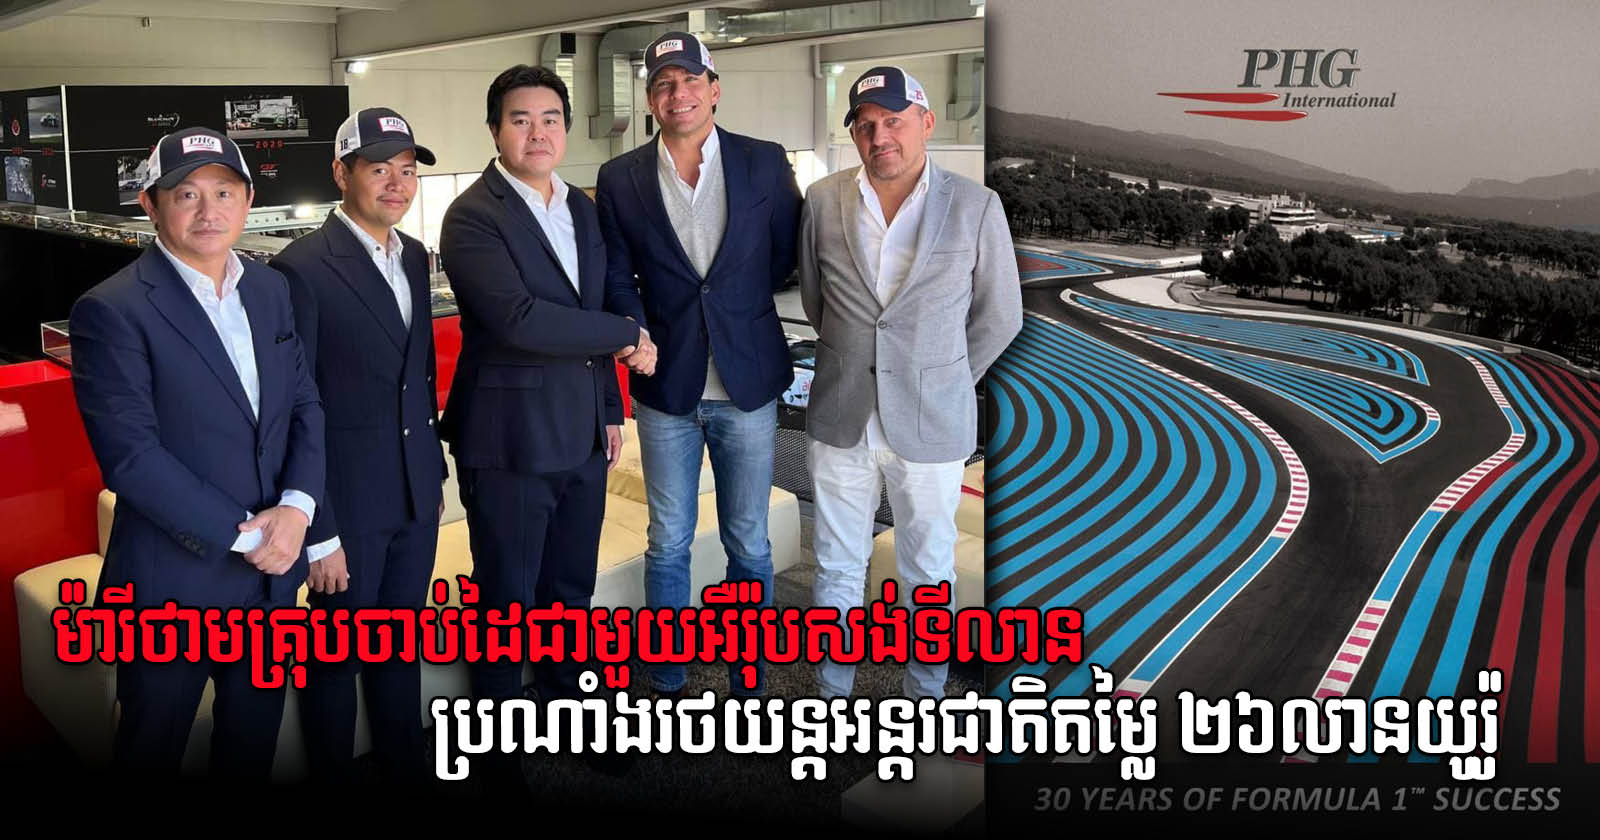 Cambodia to Have First International Racetrack Worth Approx. €26 million